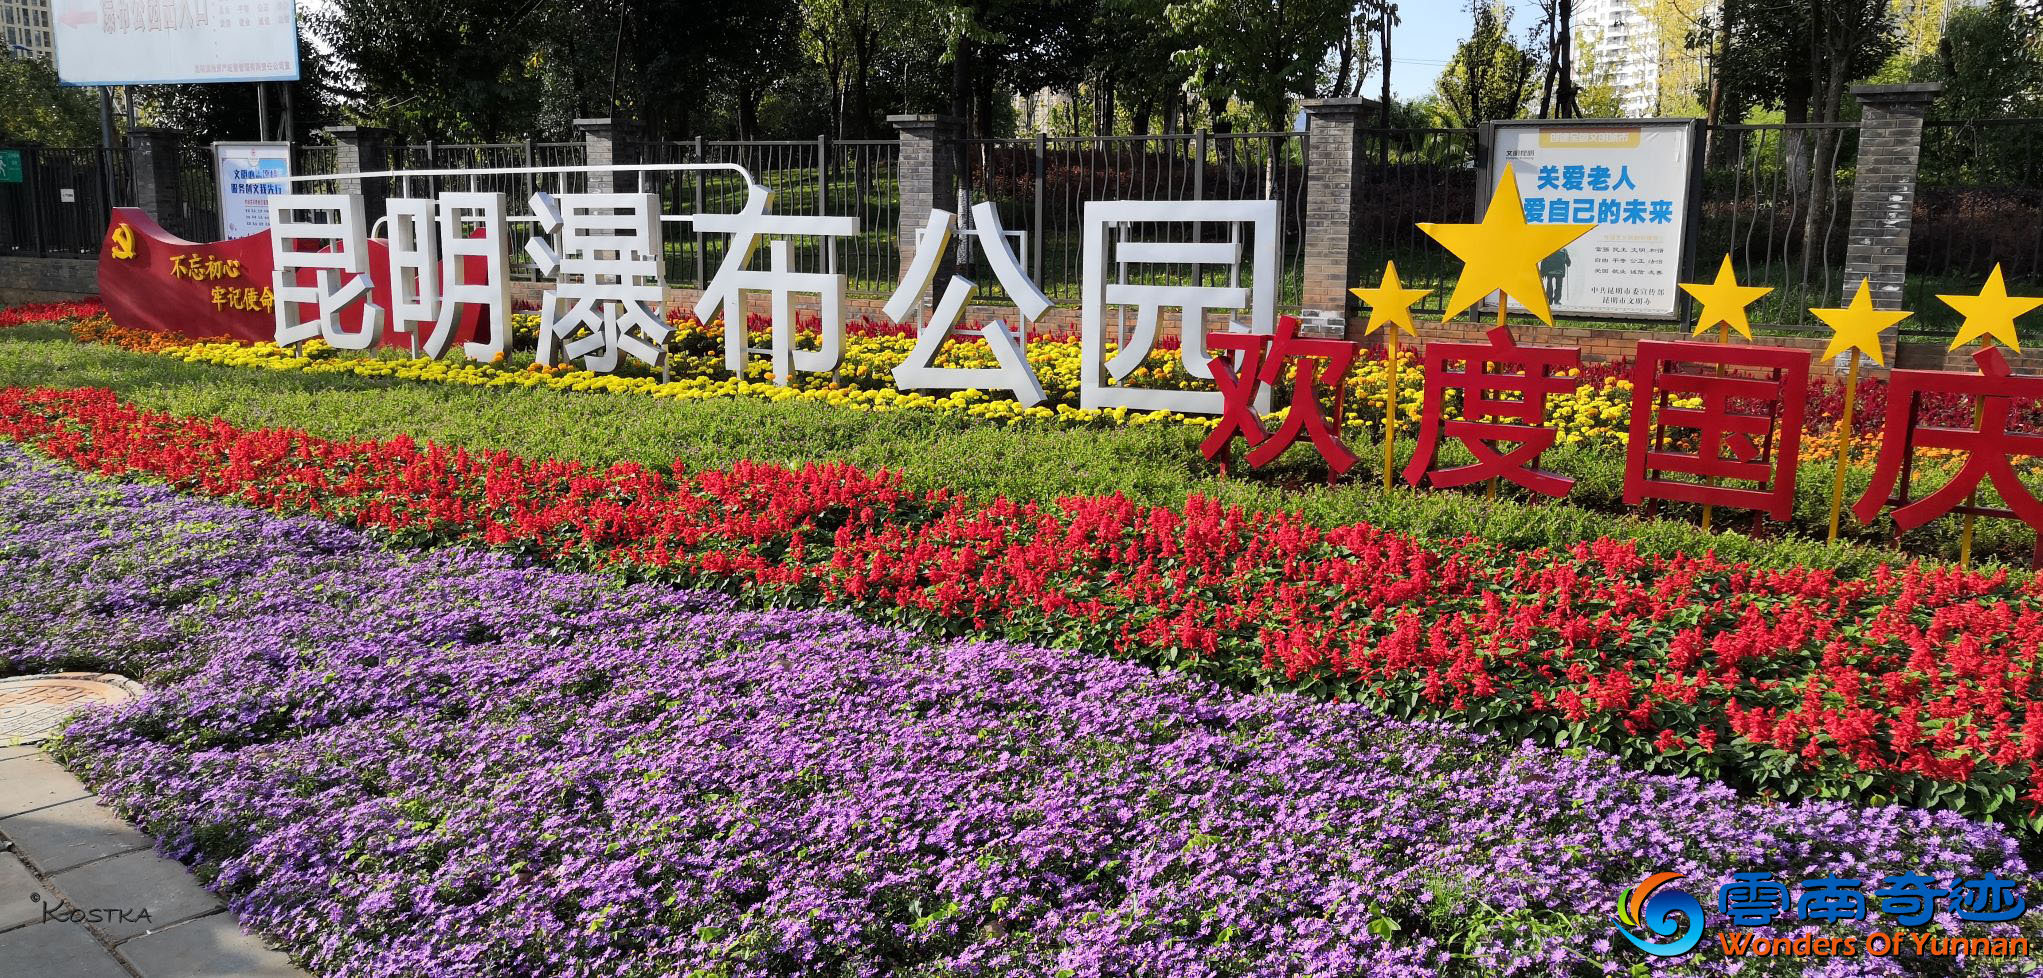 Flowerbed at the east side of Kunming’s’ Waterfall Park with Chinese characters written Kunming Waterfall Park Shuixin District, Kunming, China 云南省 昆明市 水新区